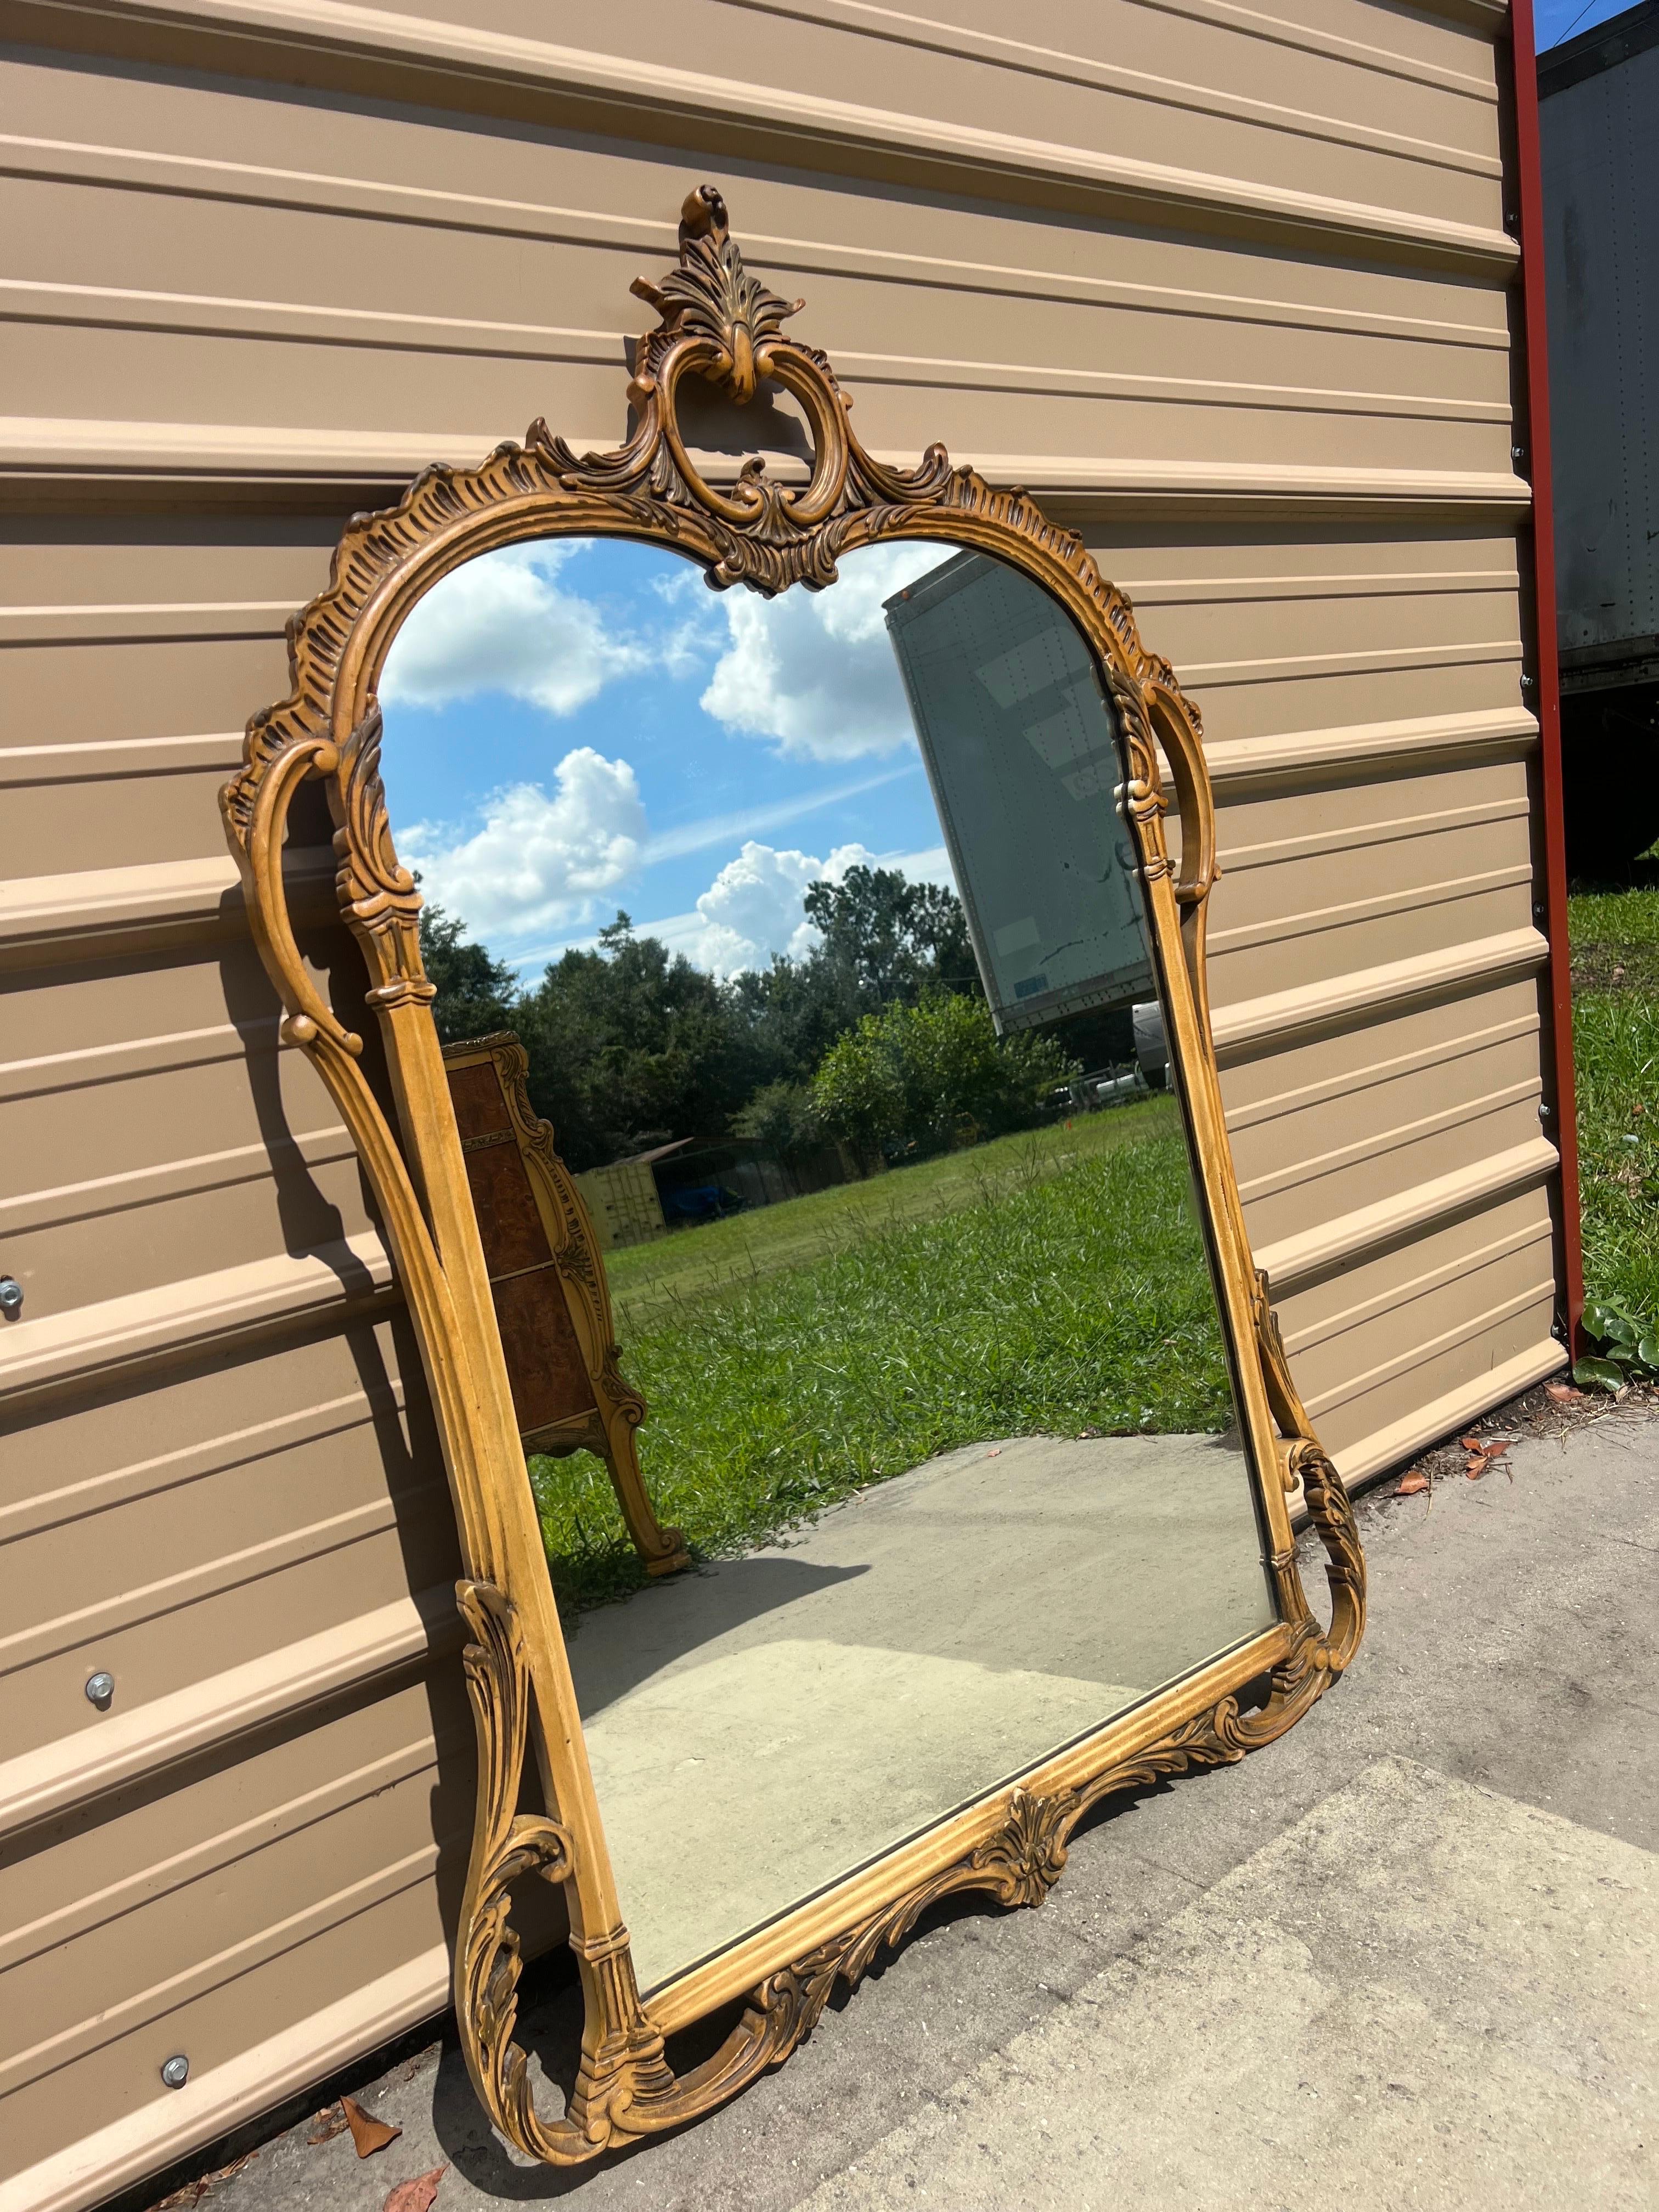 Mid-20th Century French Louis XVI Carved, painted and Giltwood ornate Mirror.  Ready to hang.  Stunning mirror!  Wood backing.